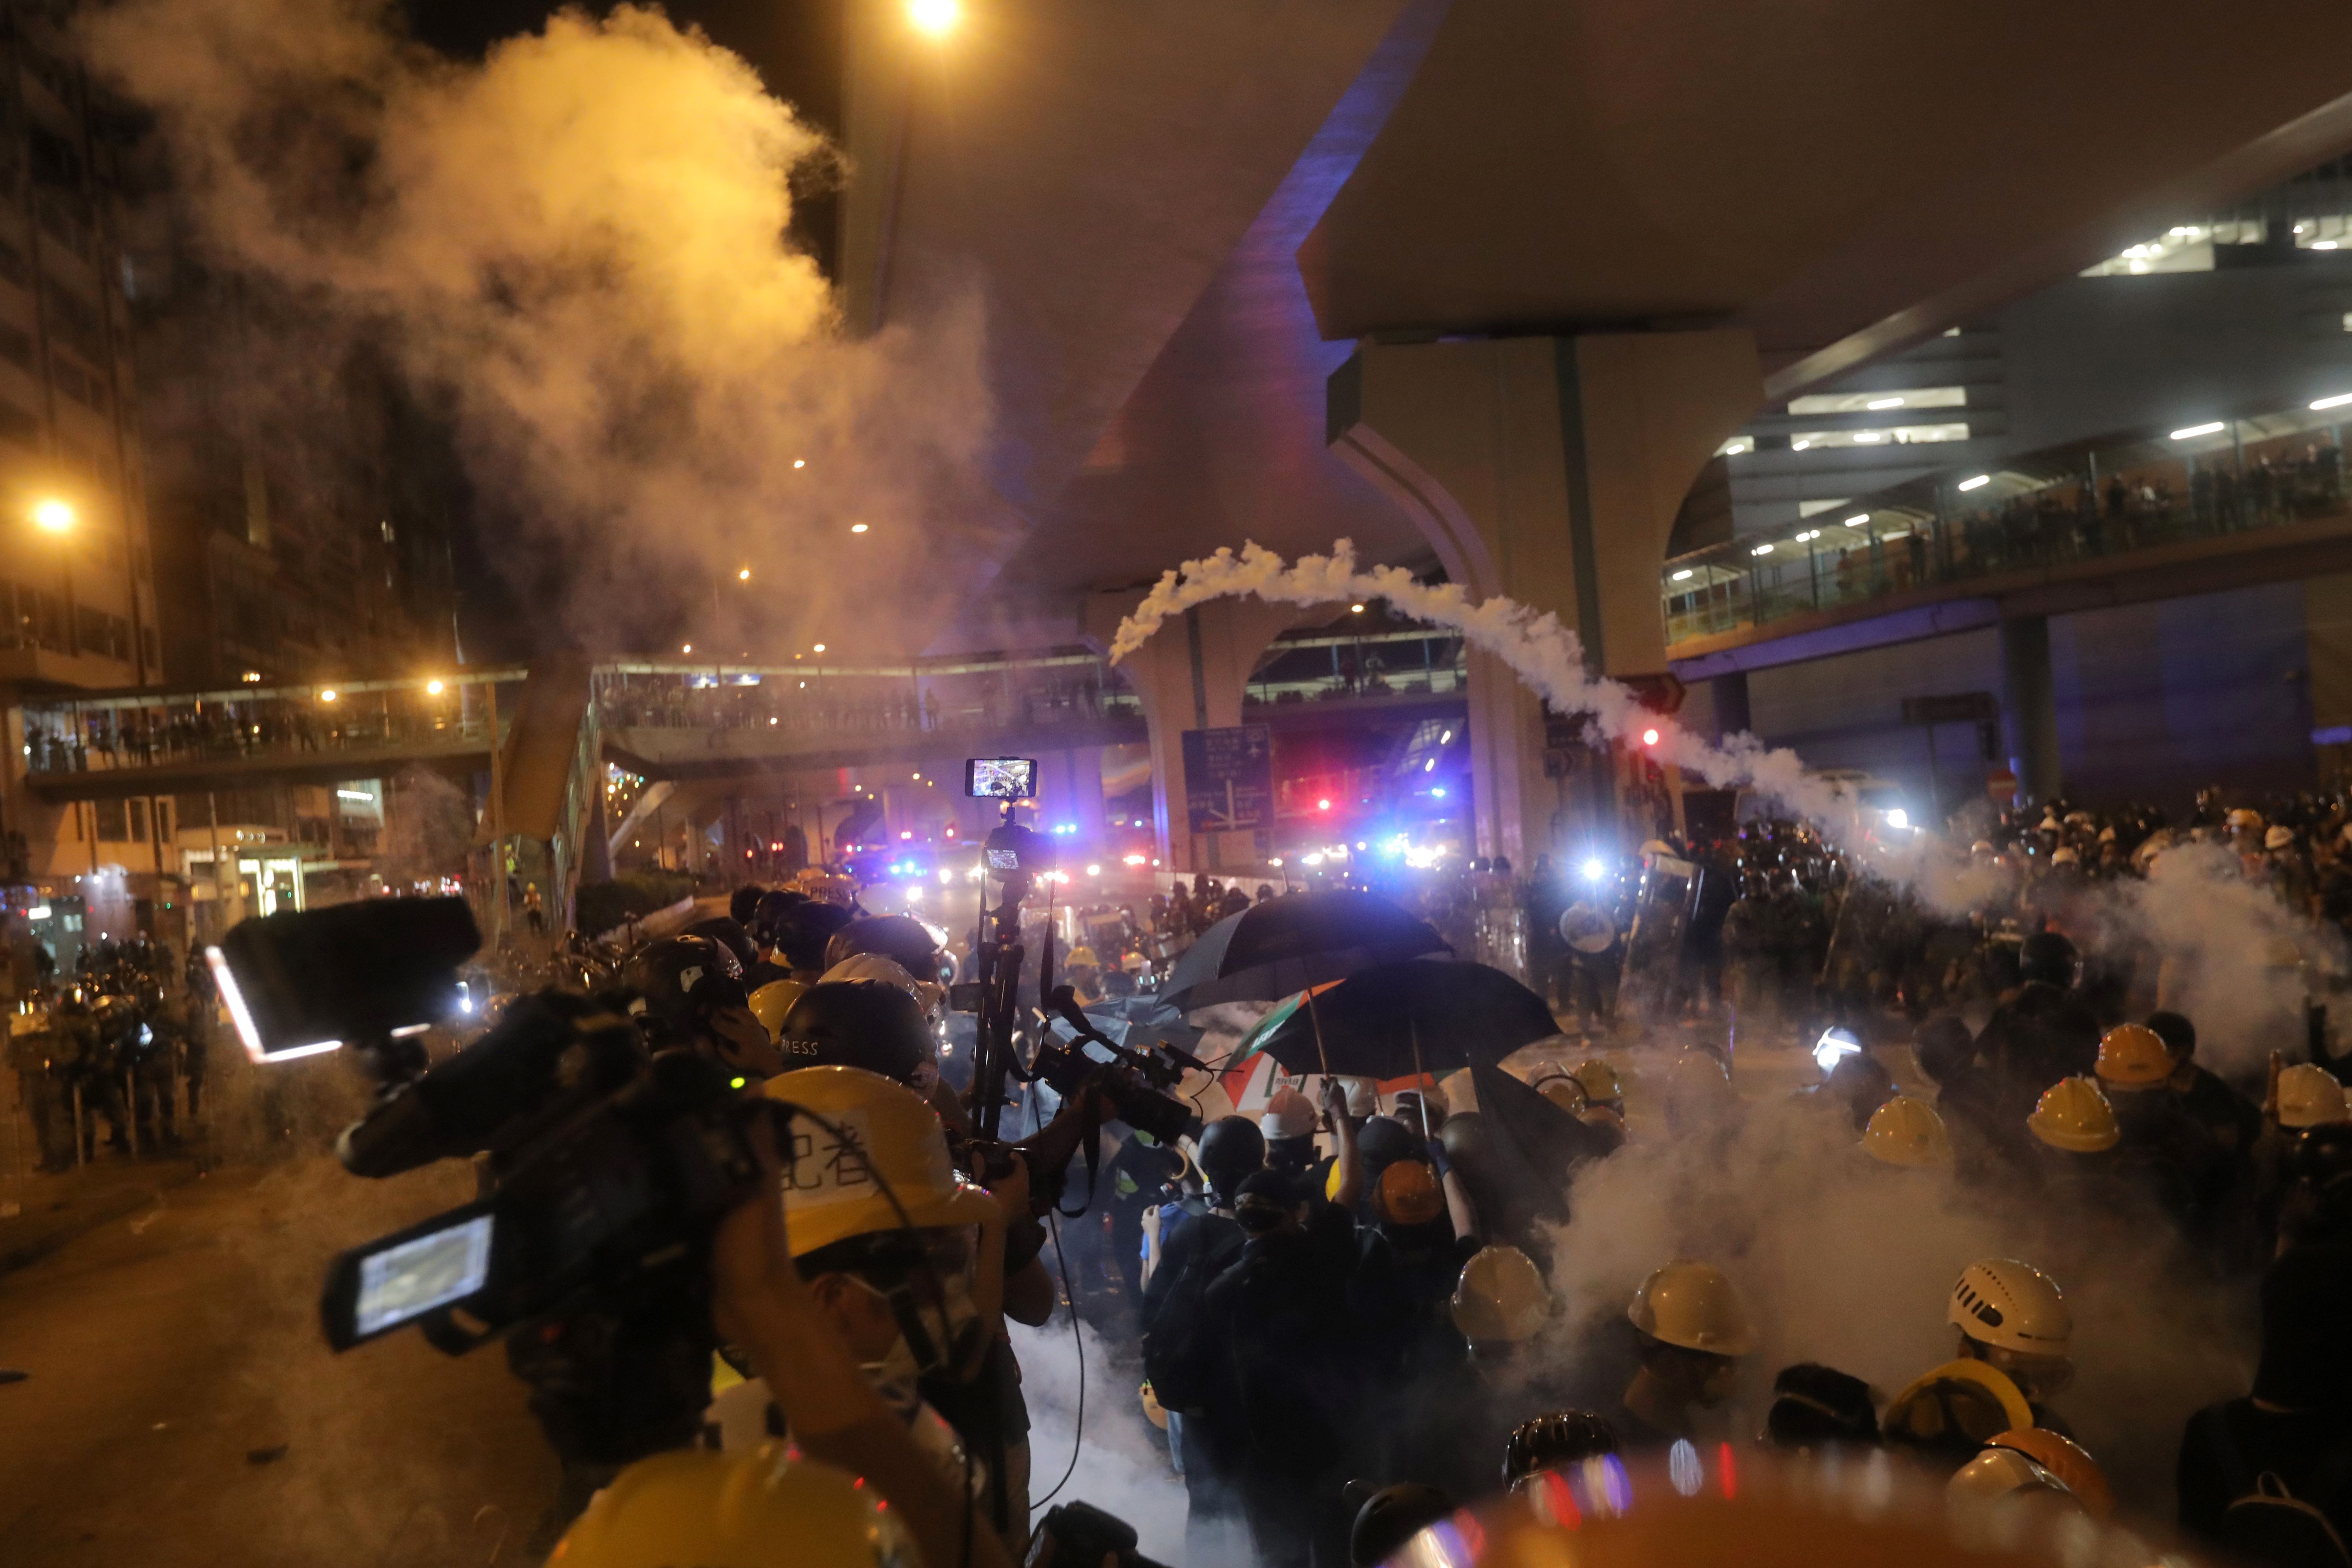 Police fire tear gas to disperse protesters after a march against a controversial extradition bill in Hong Kong on July 21, 2019. - Masked protesters daubed the walls of China's office in Hong Kong with eggs and graffiti on the night of July 21 following another massive rally, focusing anger towards the embodiment of Beijing's rule with no end in sight to the turmoil engulfing the finance hub. (Photo by Vivek Prakash / AFP) (Photo credit should read VIVEK PRAKASH/AFP/Getty Images)